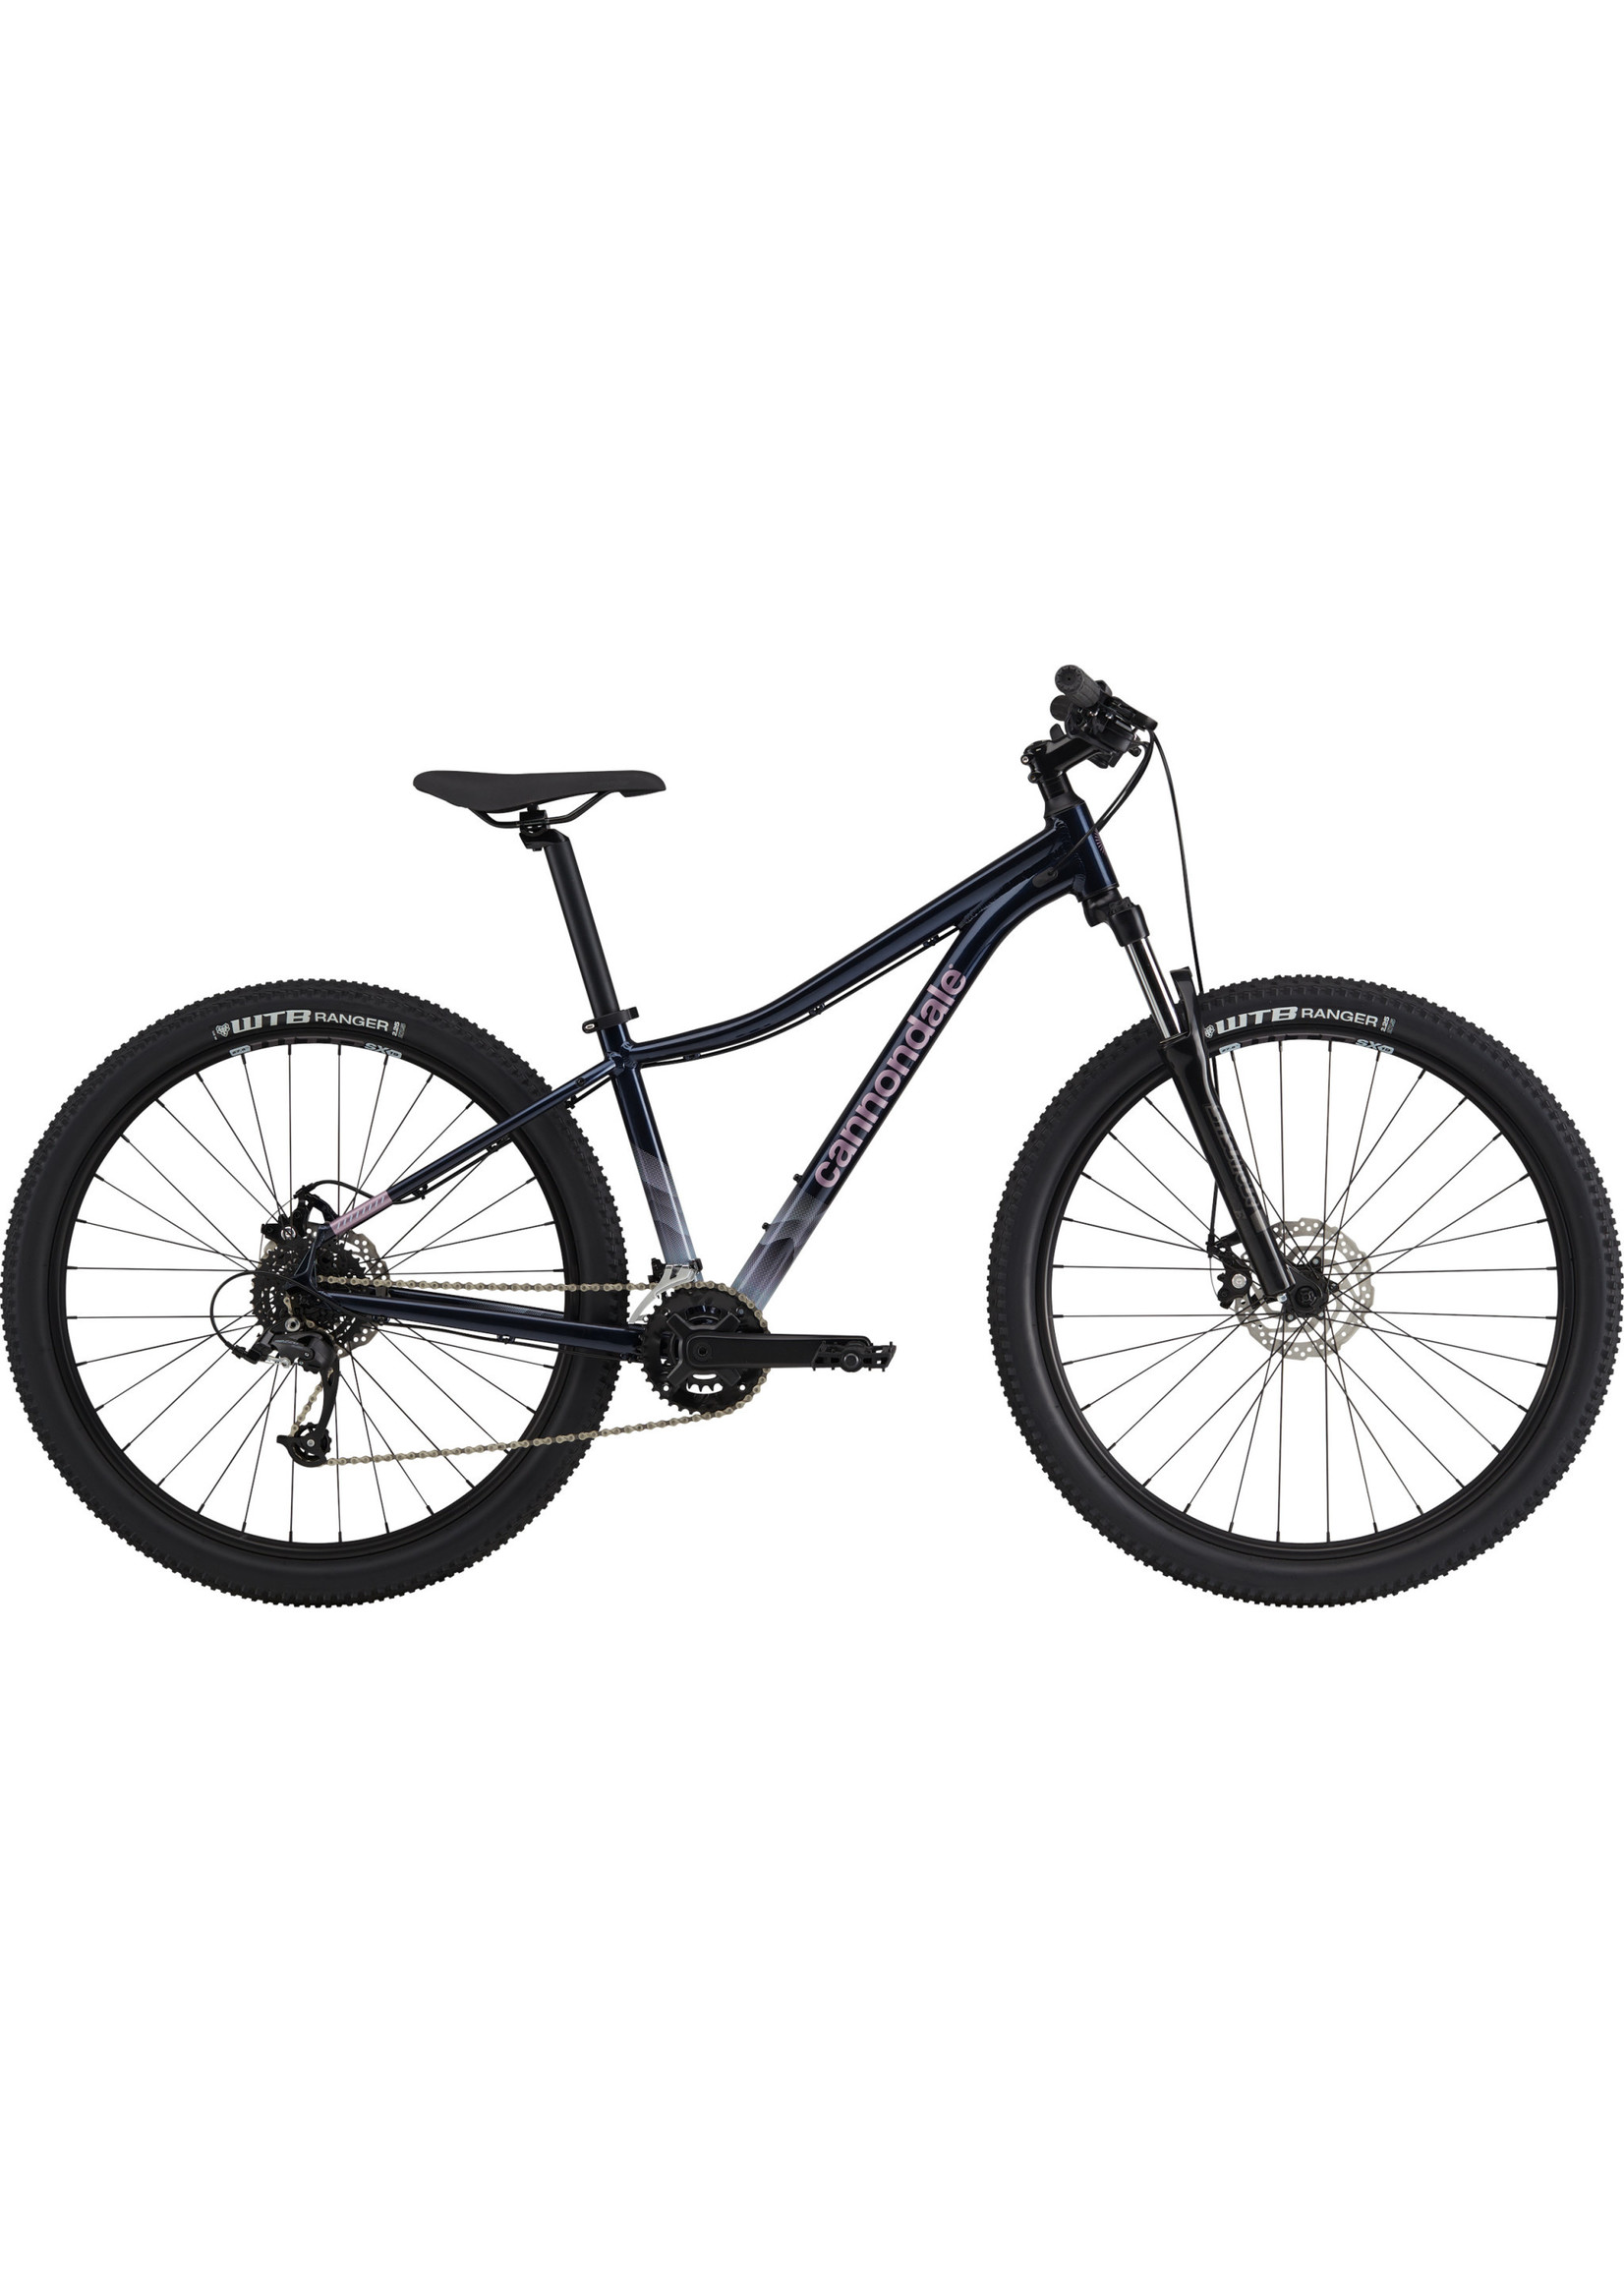 Cannondale Cannondale Trail 8 Women's Medium Midnight - MDN, MD 29 F